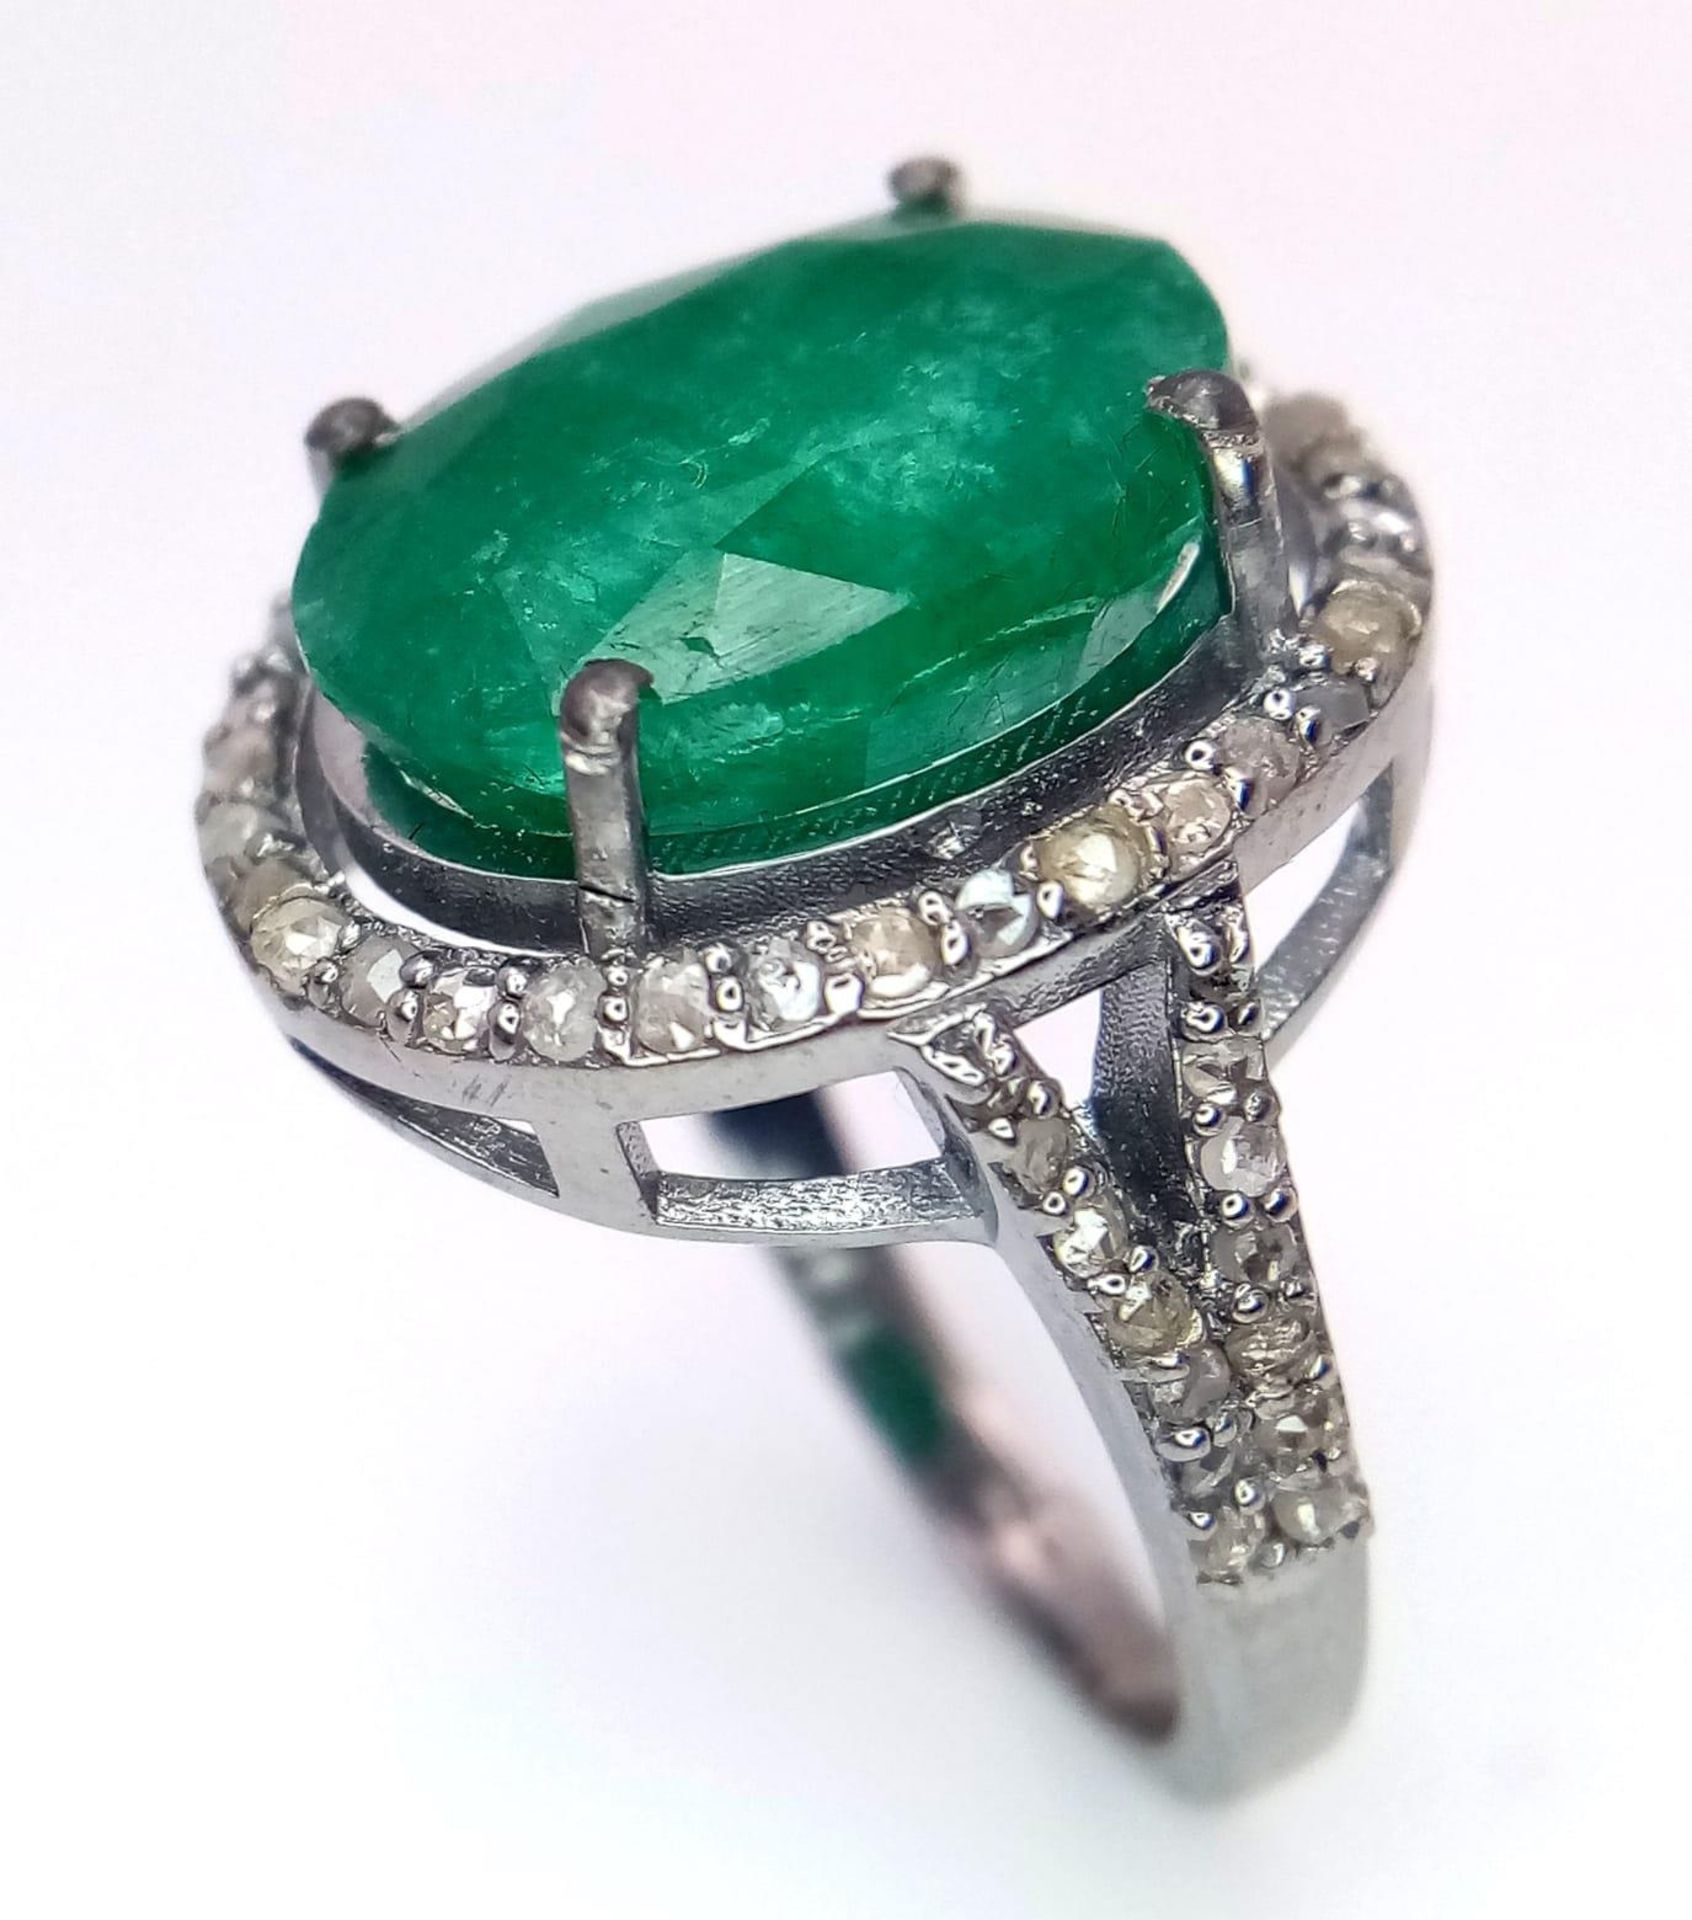 An Emerald Ring with a Halo of Diamonds on 925 Silver. 7.55ct emerald, 0.67ctw diamonds. Size N, 4. - Image 2 of 6